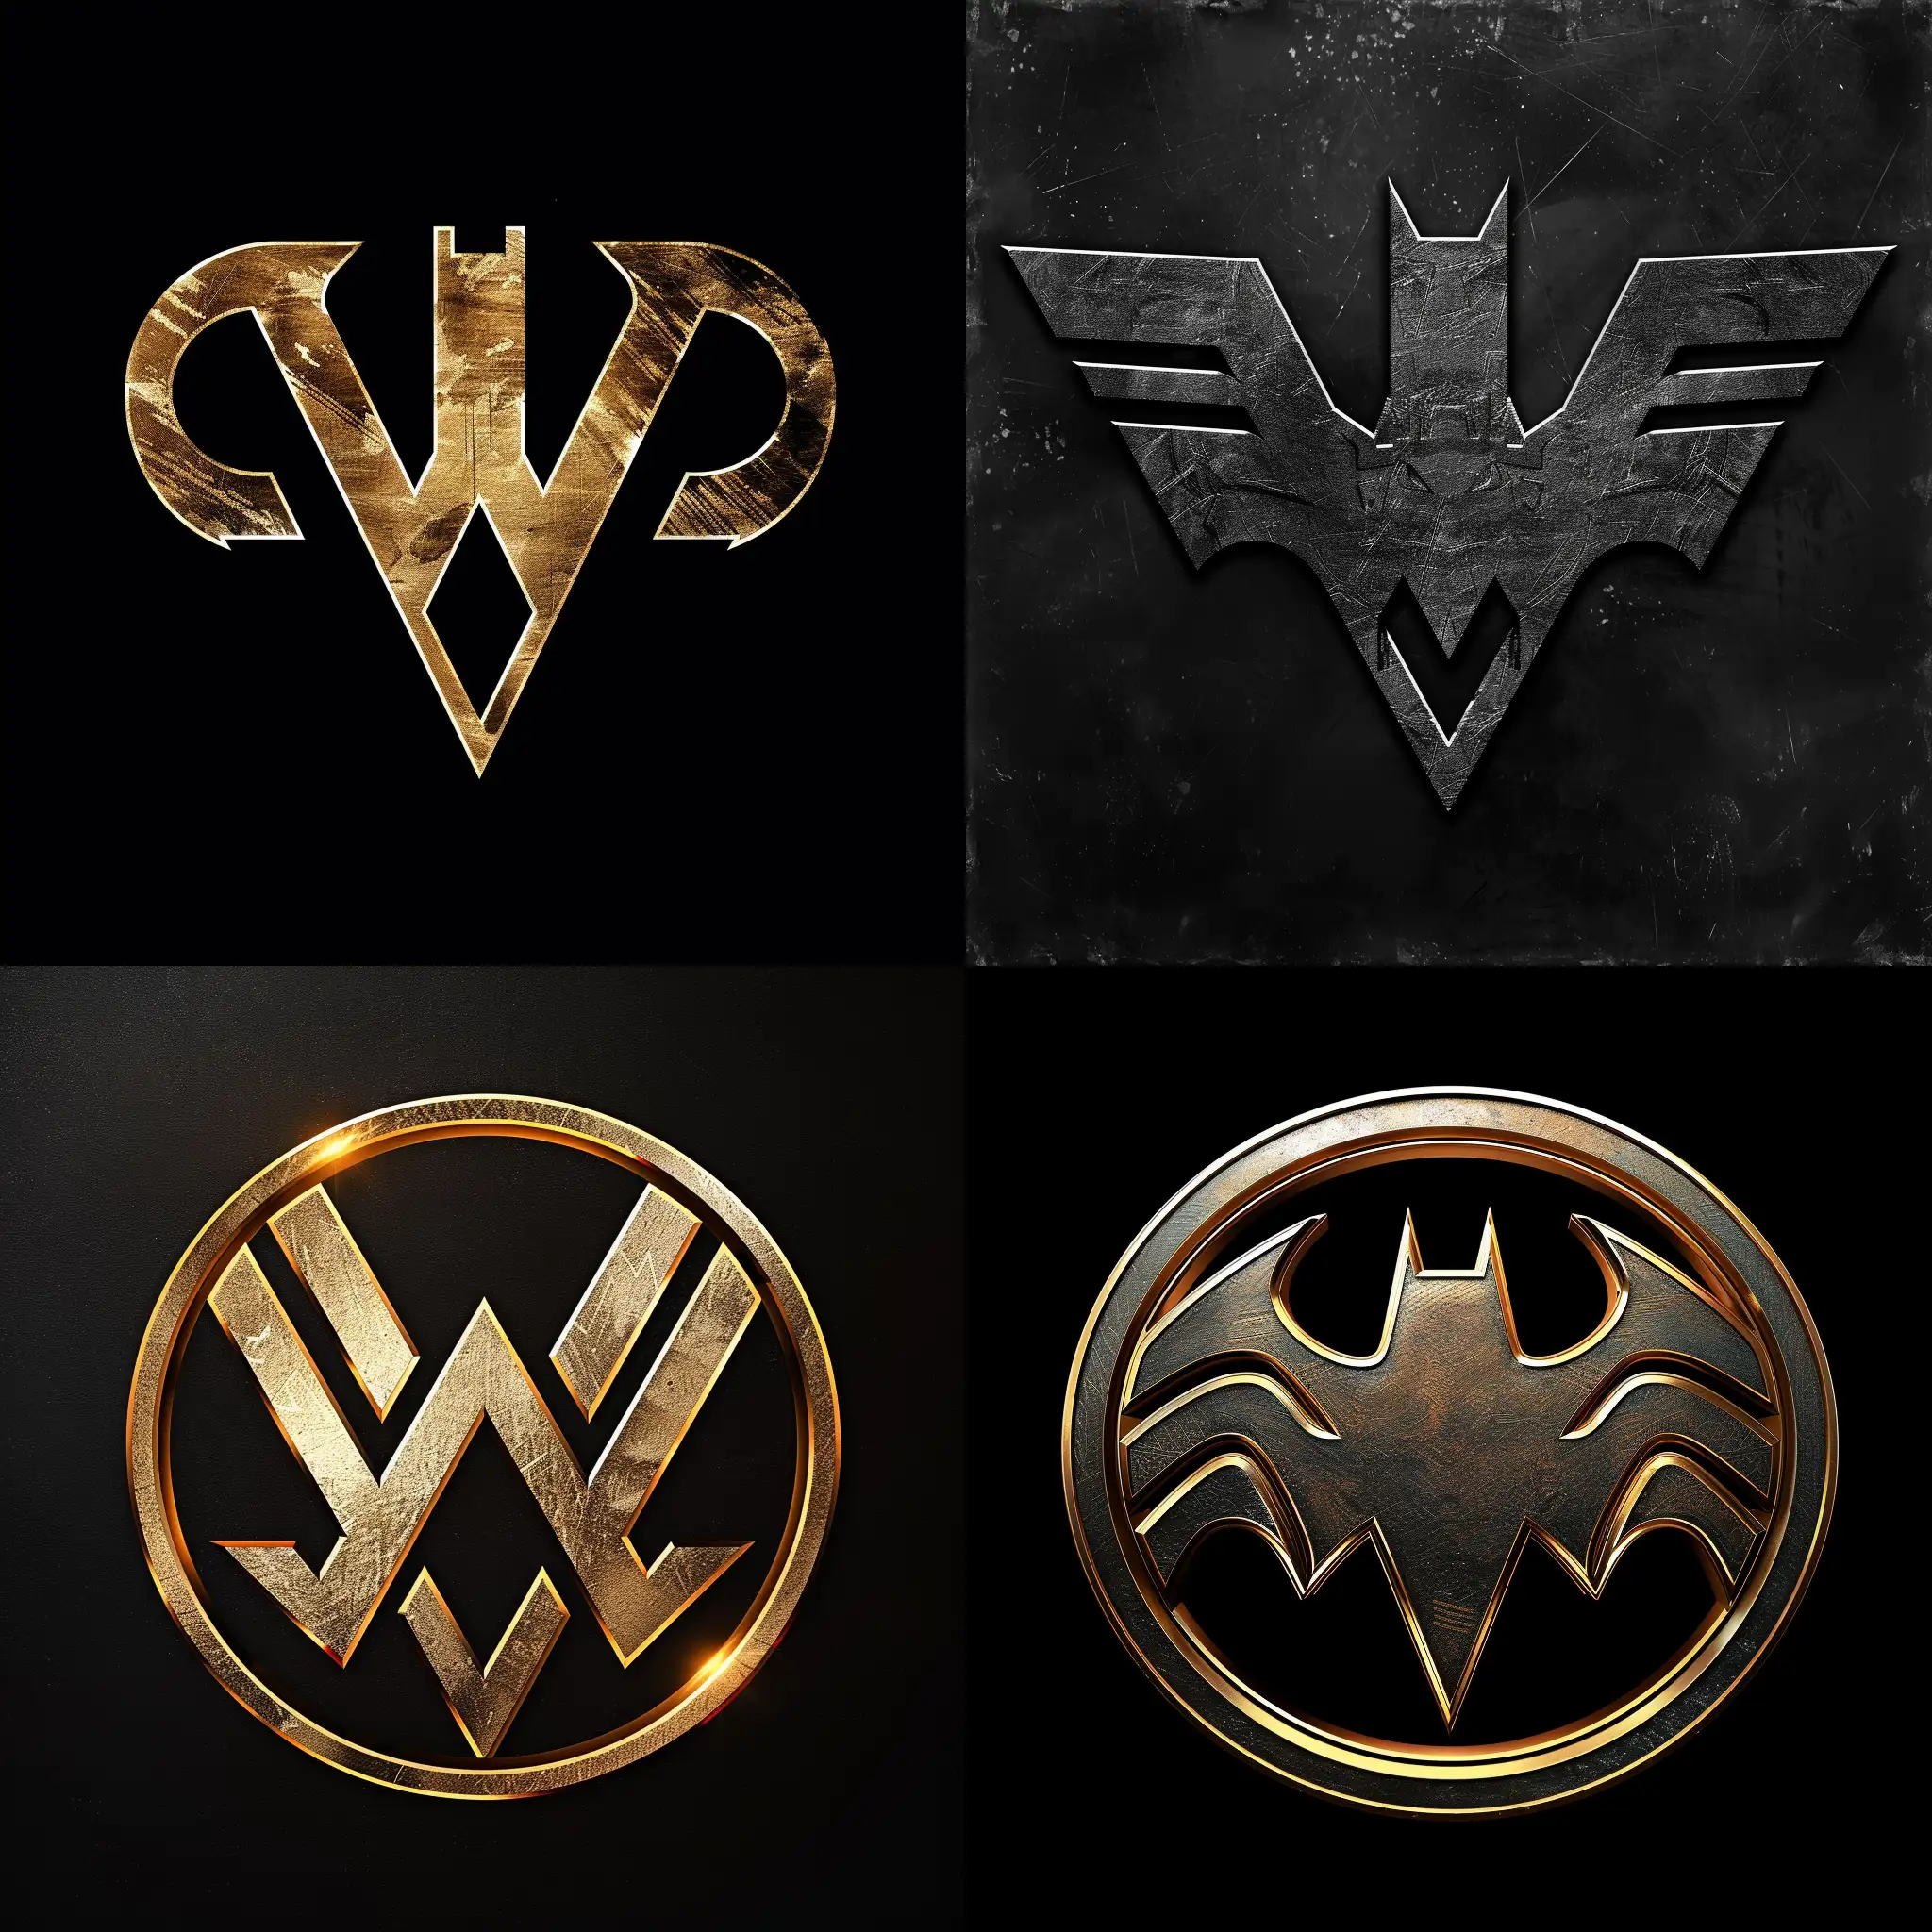 create me a logo exactly like the warner bros vector logo but replace the "WB" with "JD"